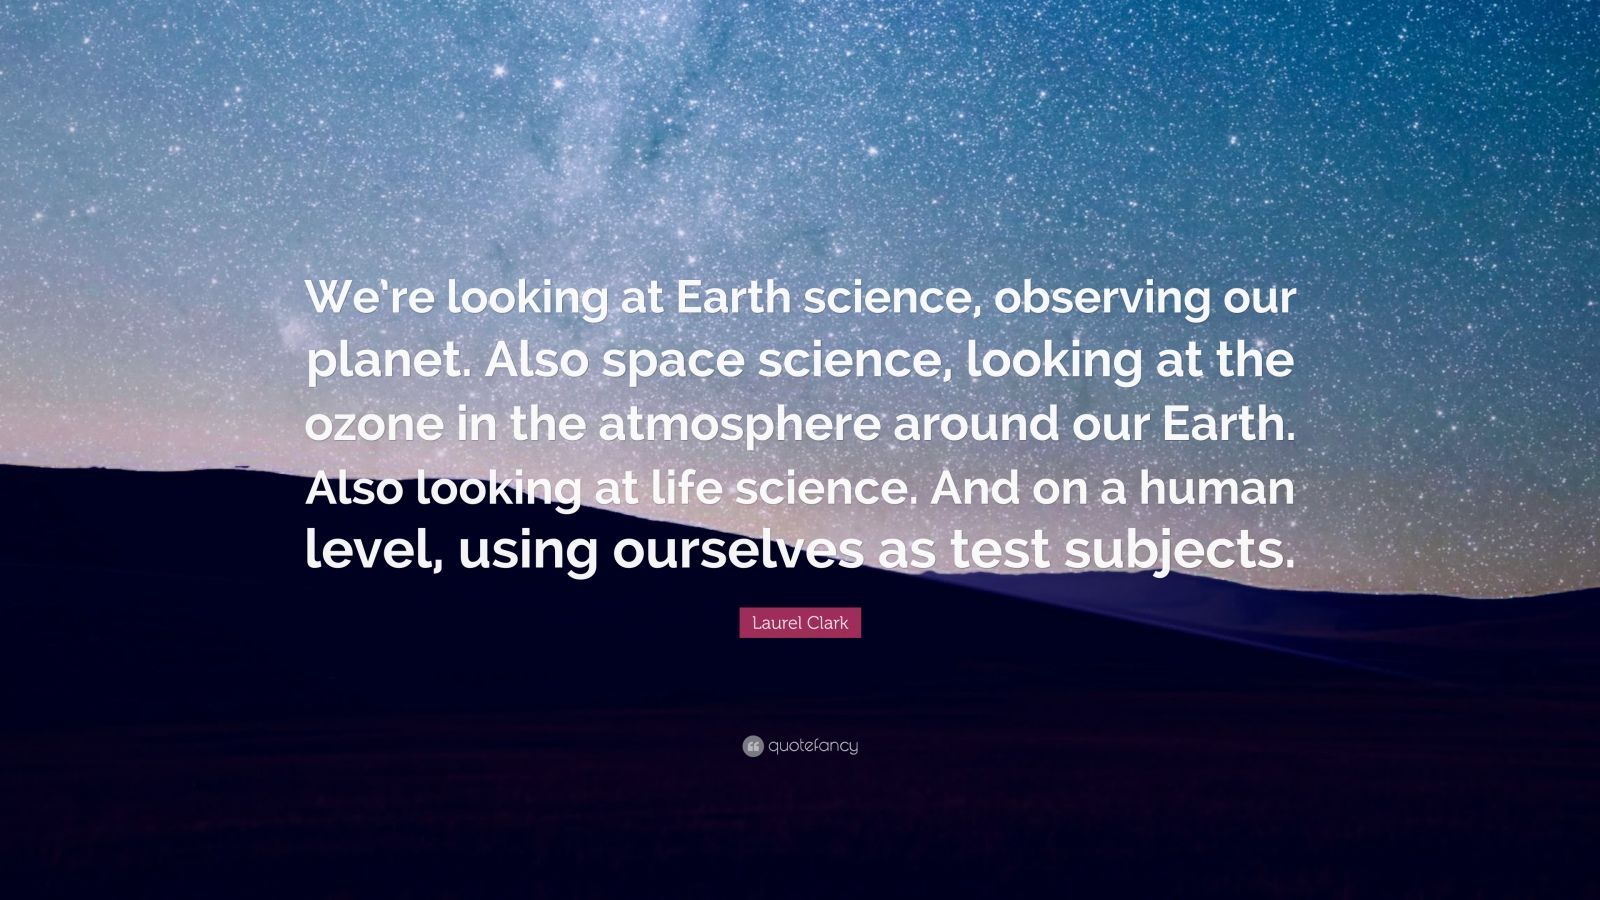 Laurel Clark Quote: “We're looking at Earth science, observing our planet. Also space science, looking at the ozone in the atmosphere around .” (7 wallpaper)